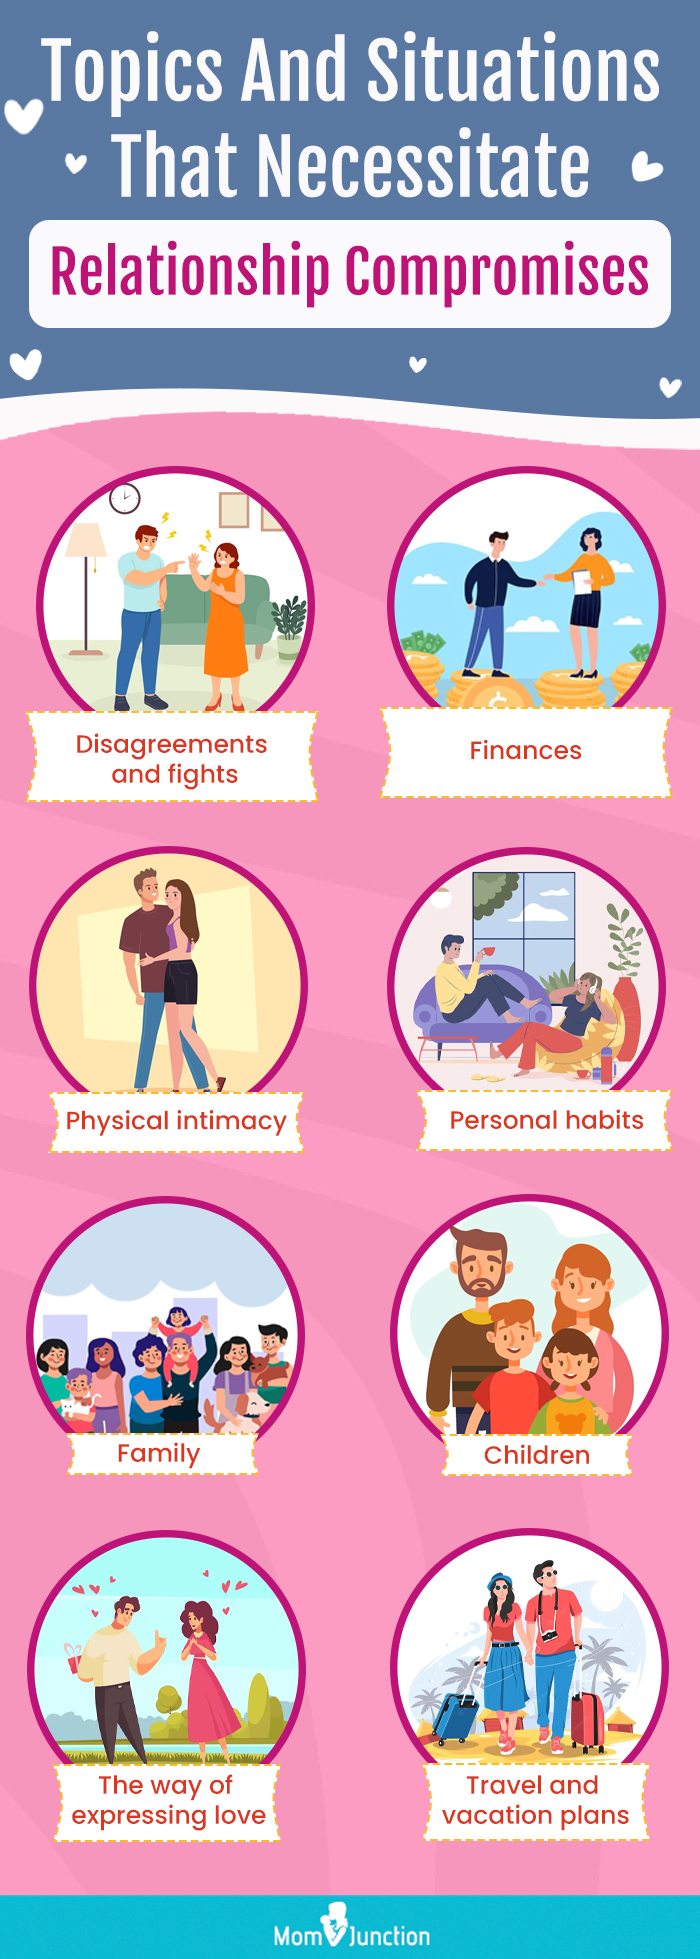 topics and situations that necessitate relationship compromises (infographic)